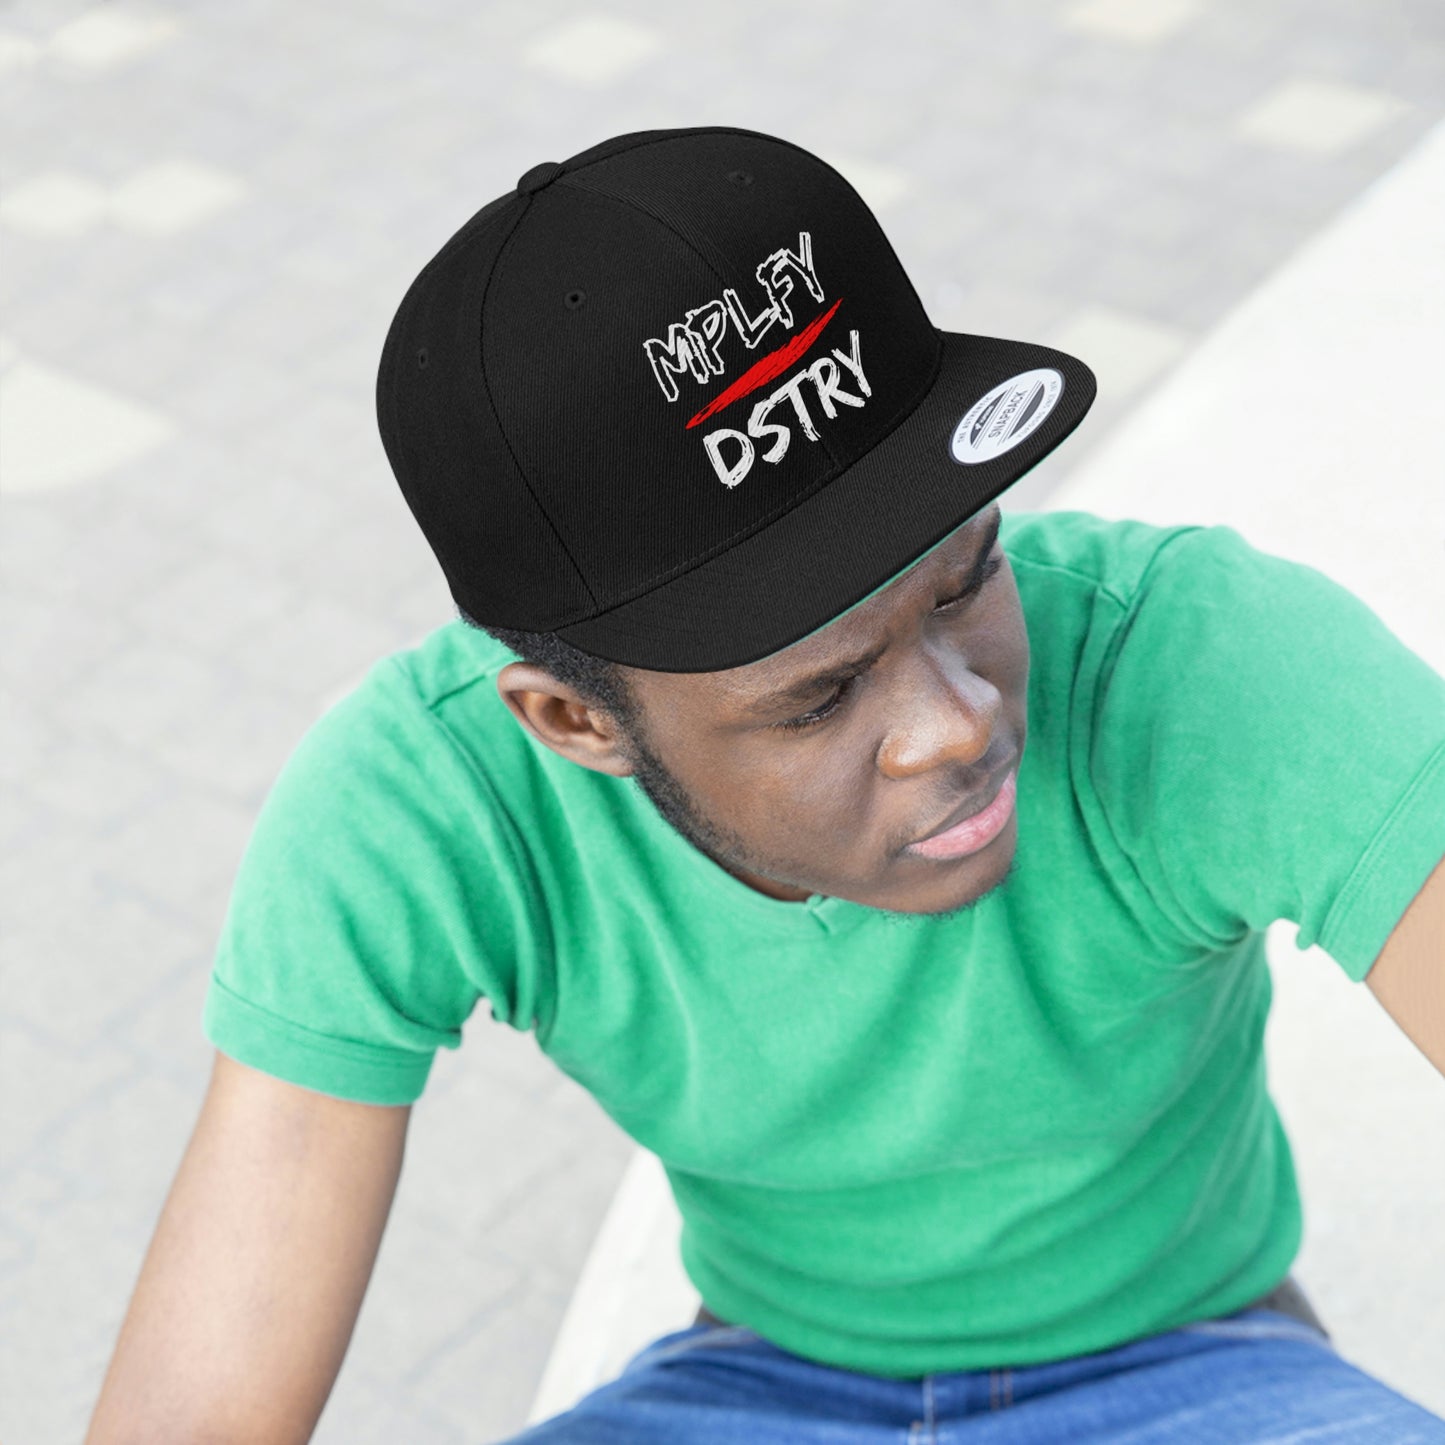 MPLFYDSTRY Embroidered Snapback Cap